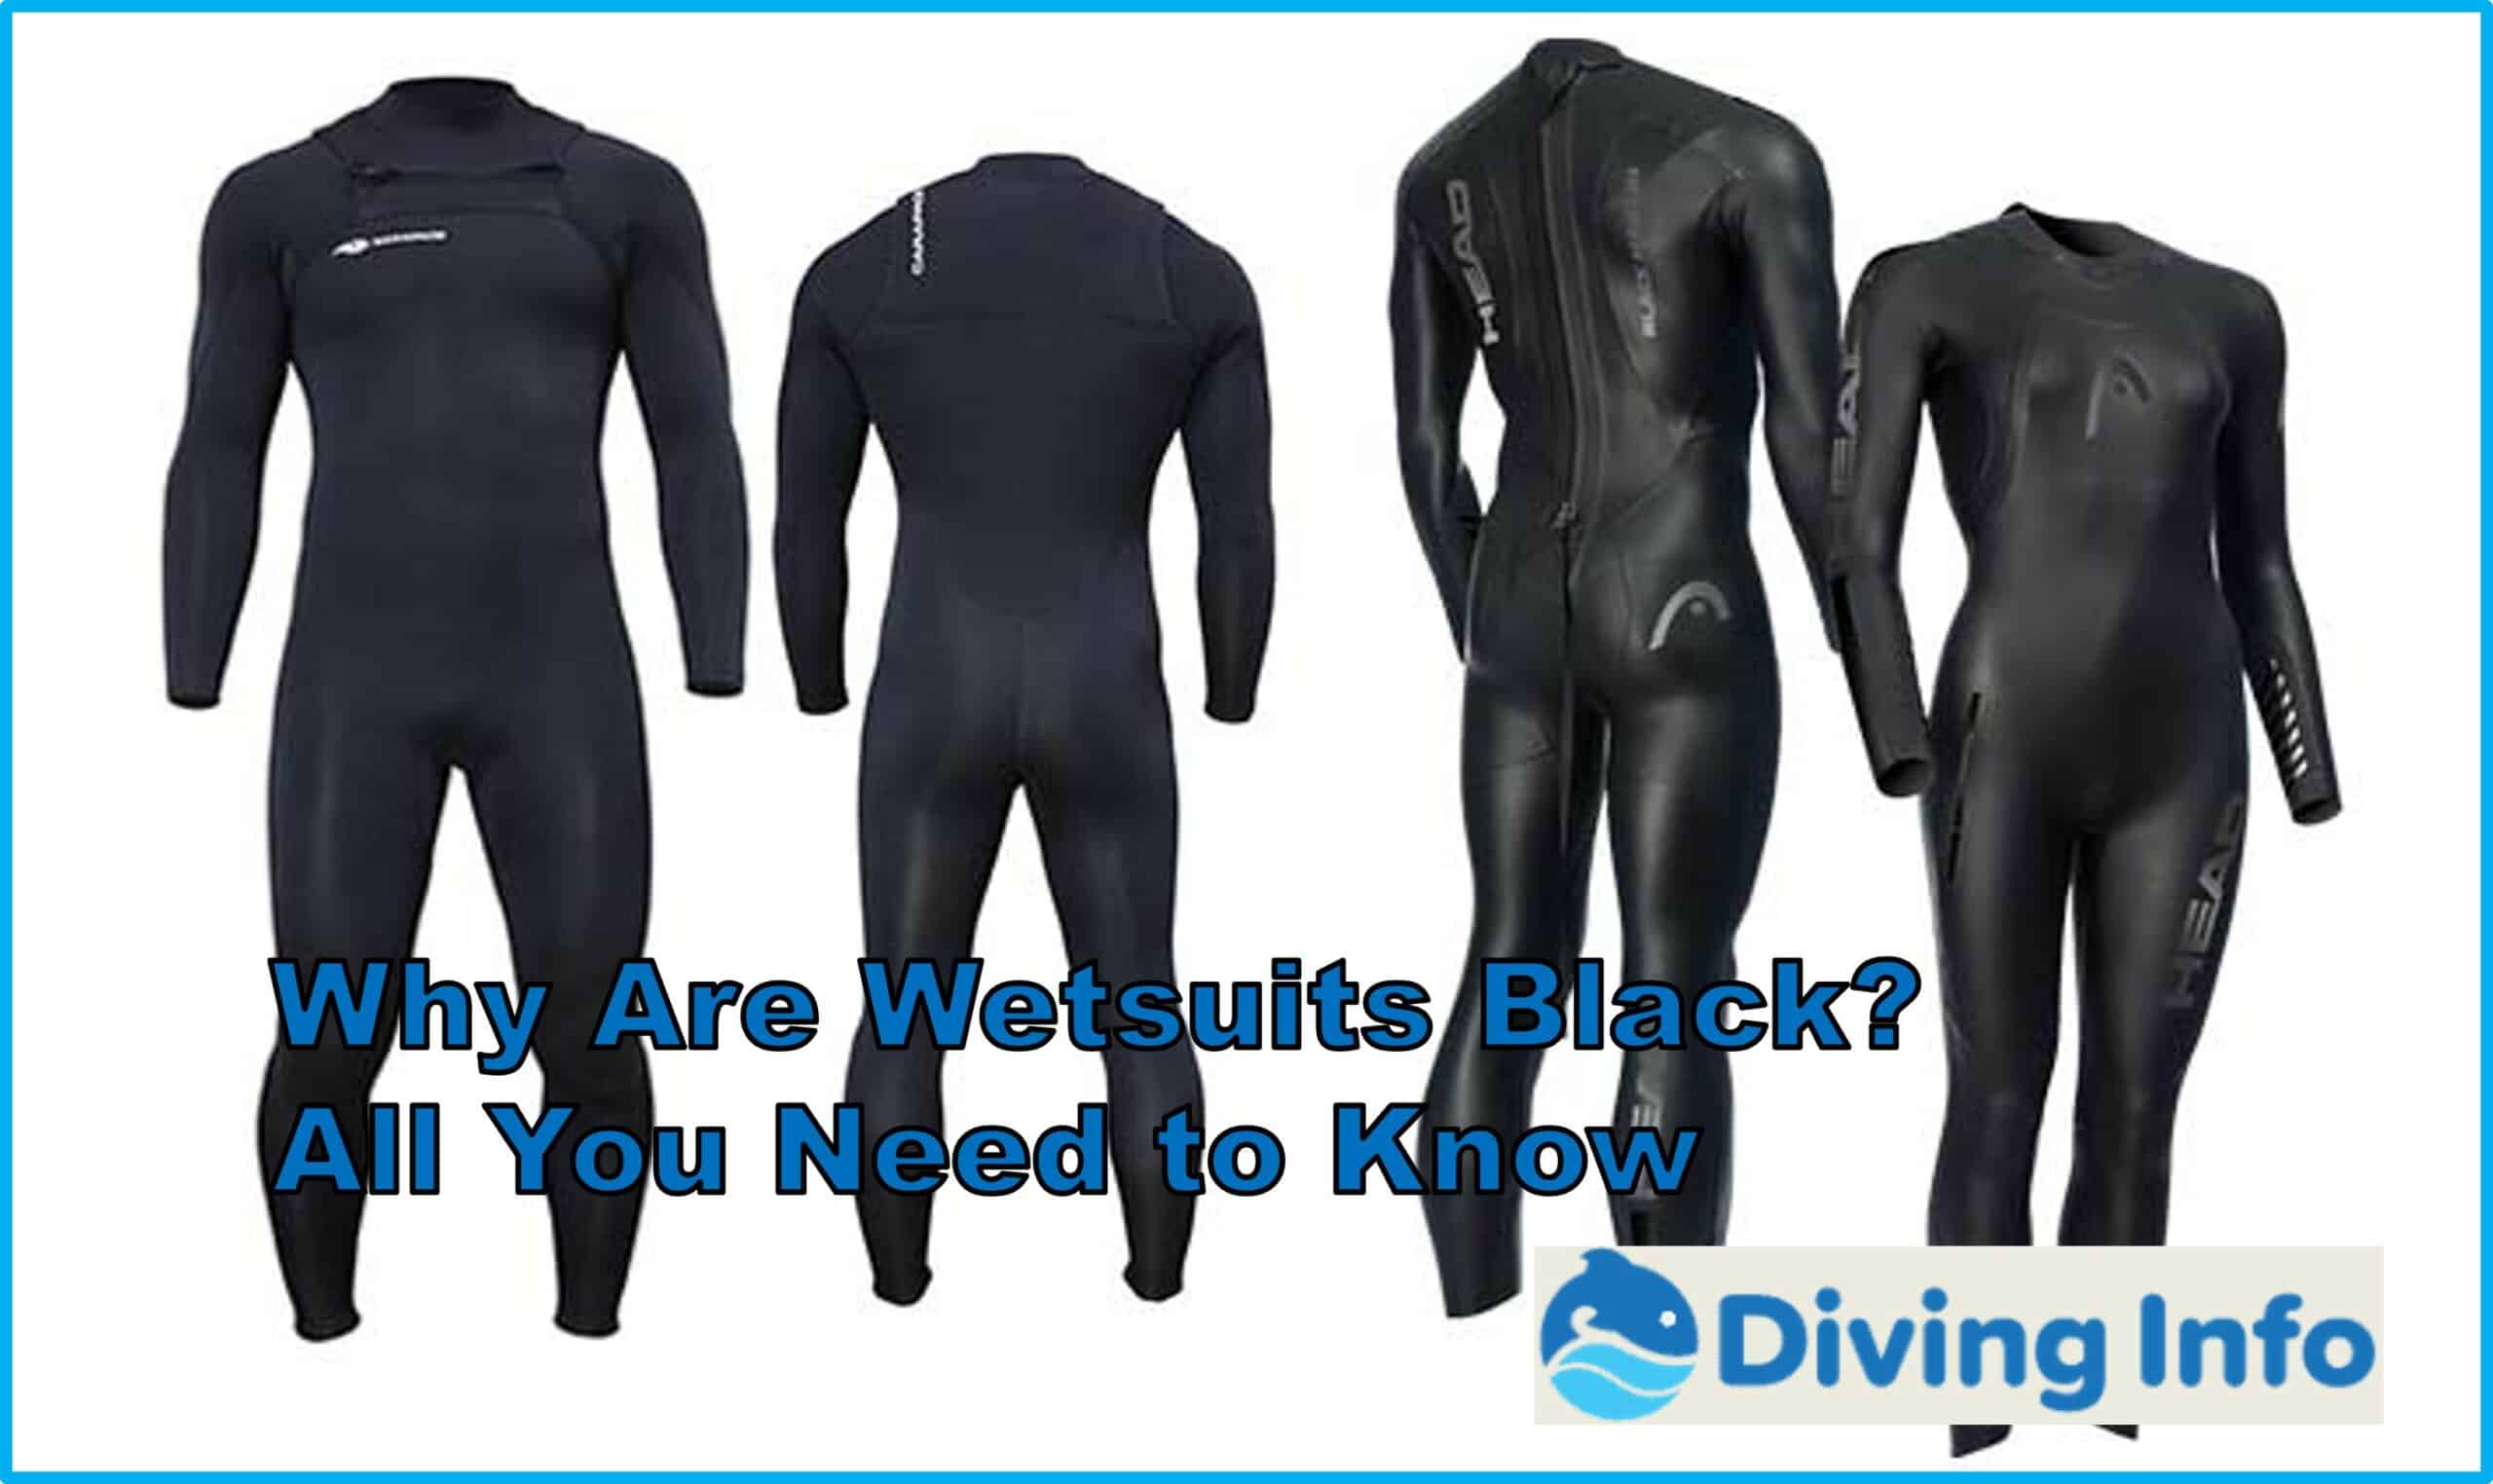 Why Are Wetsuits Black? All You Need to Know